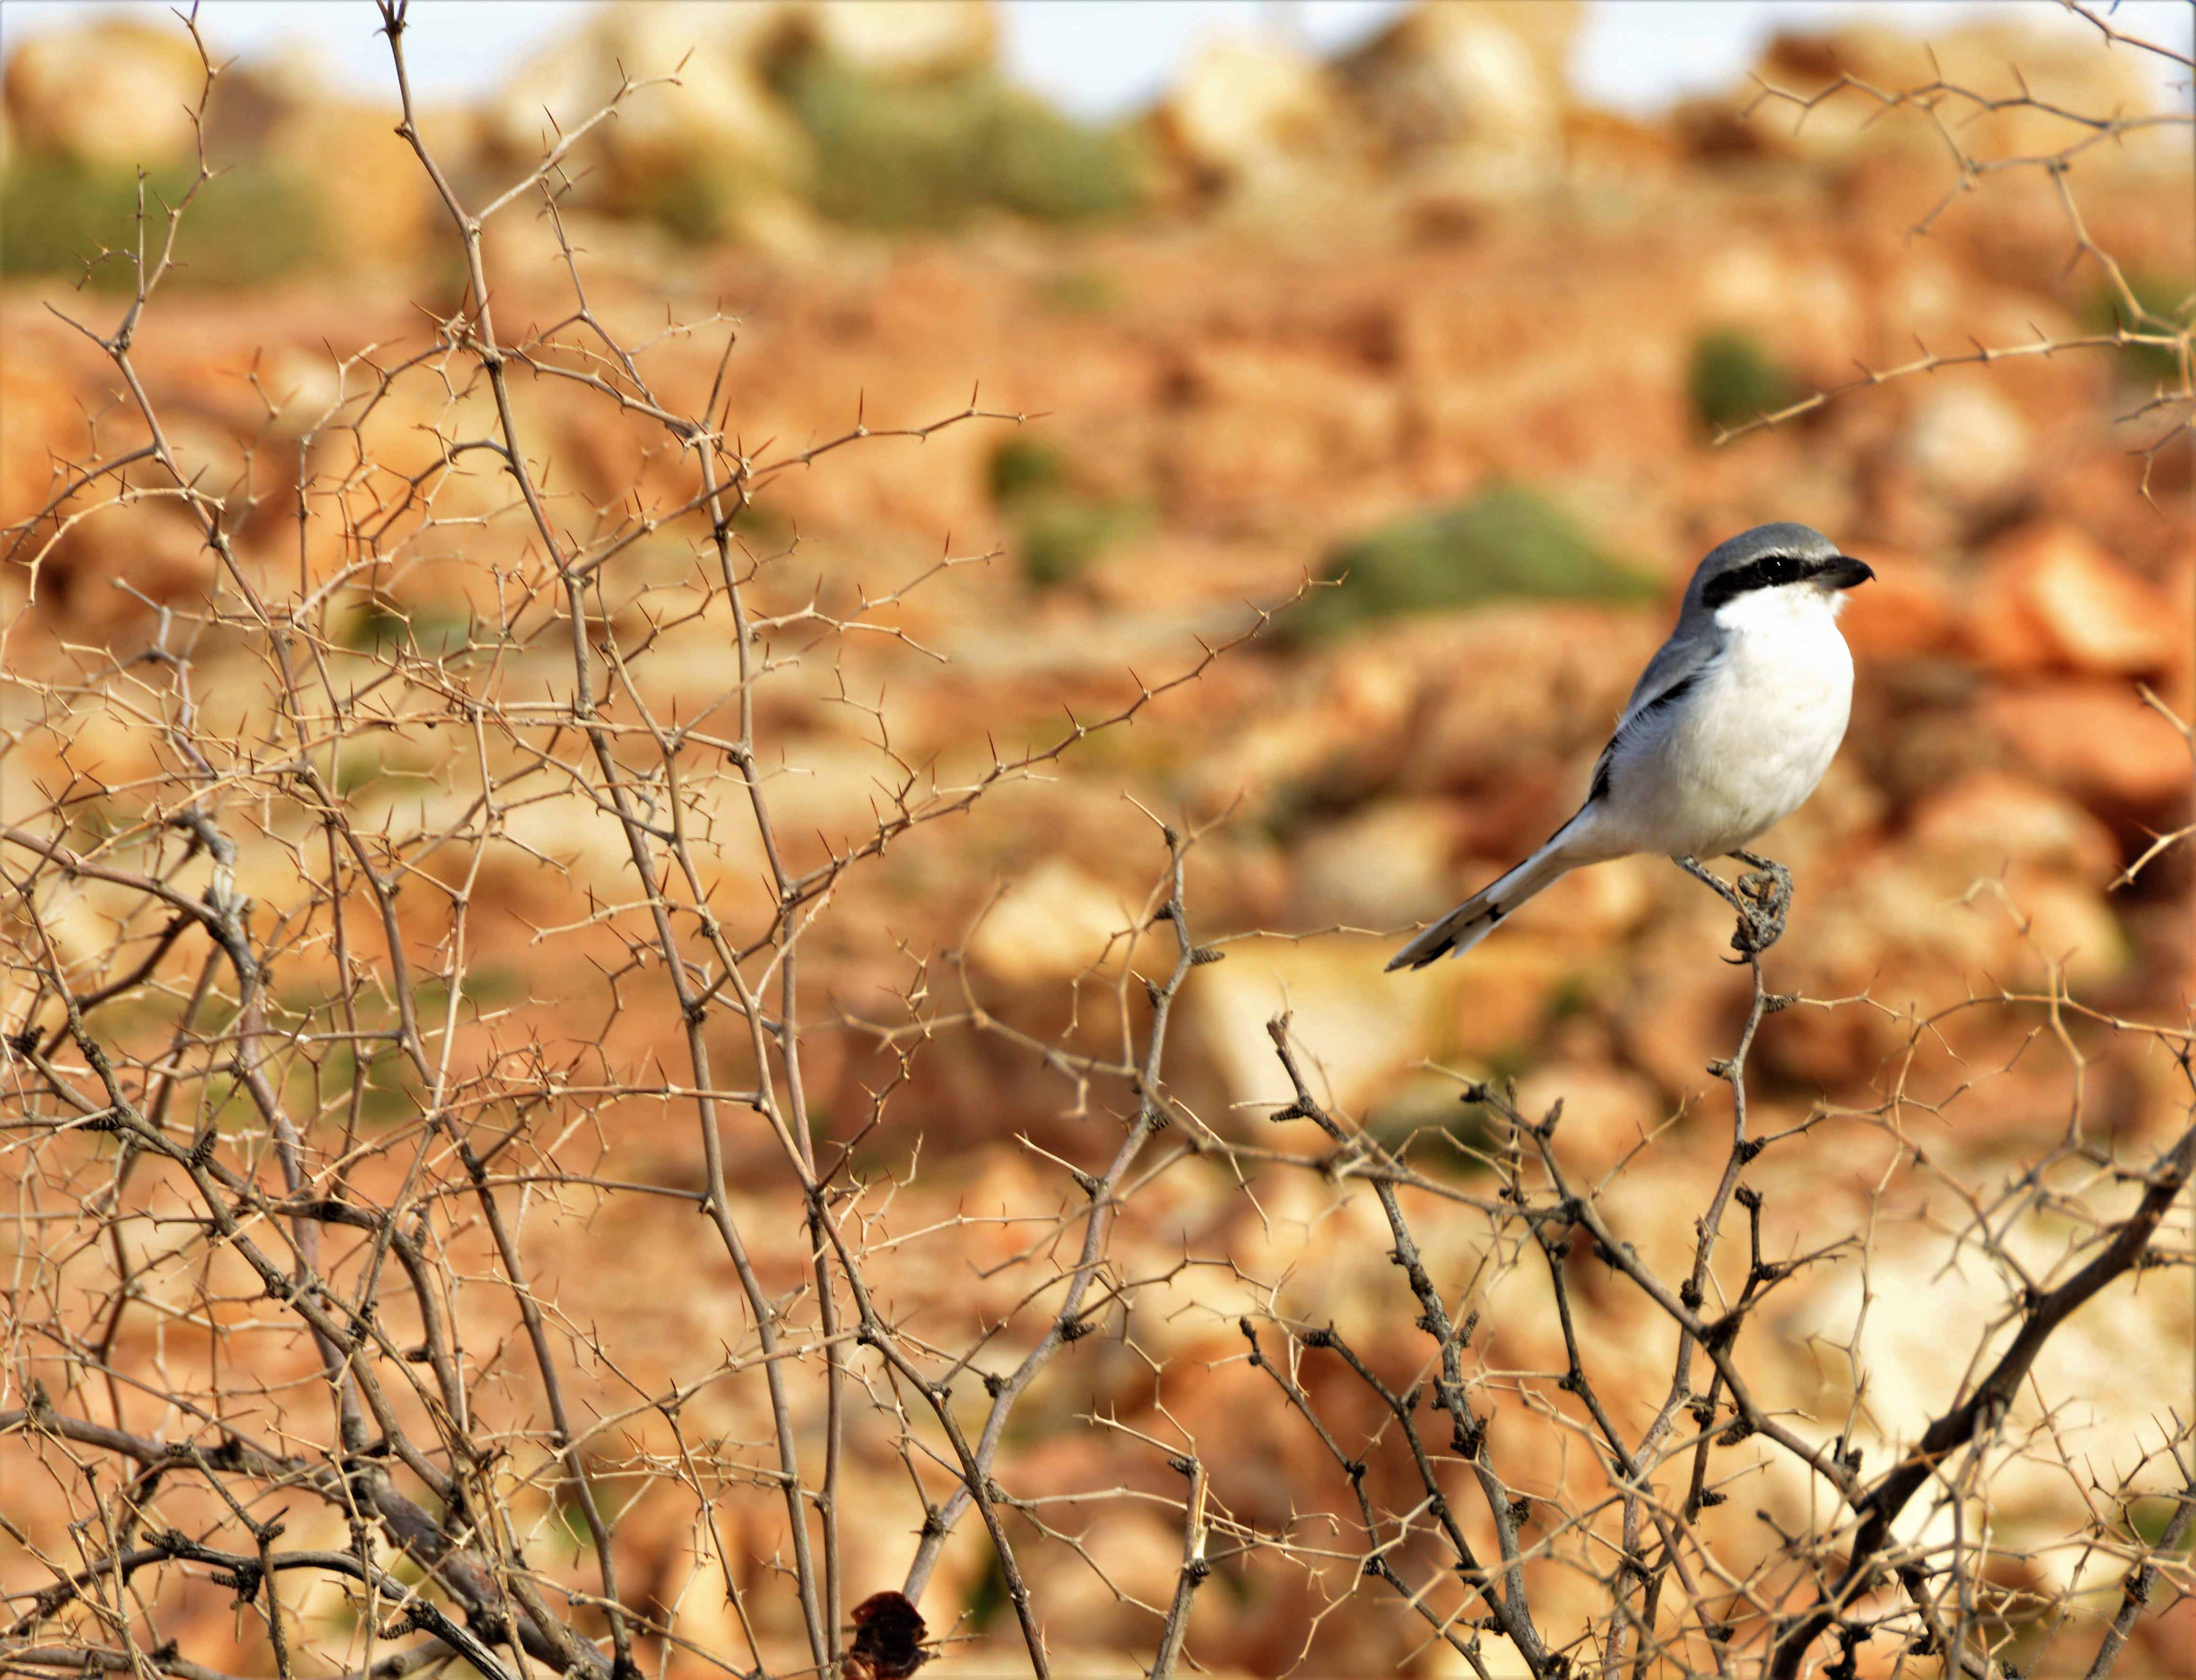 A shrike - most likely - spotted on our walk near Meski